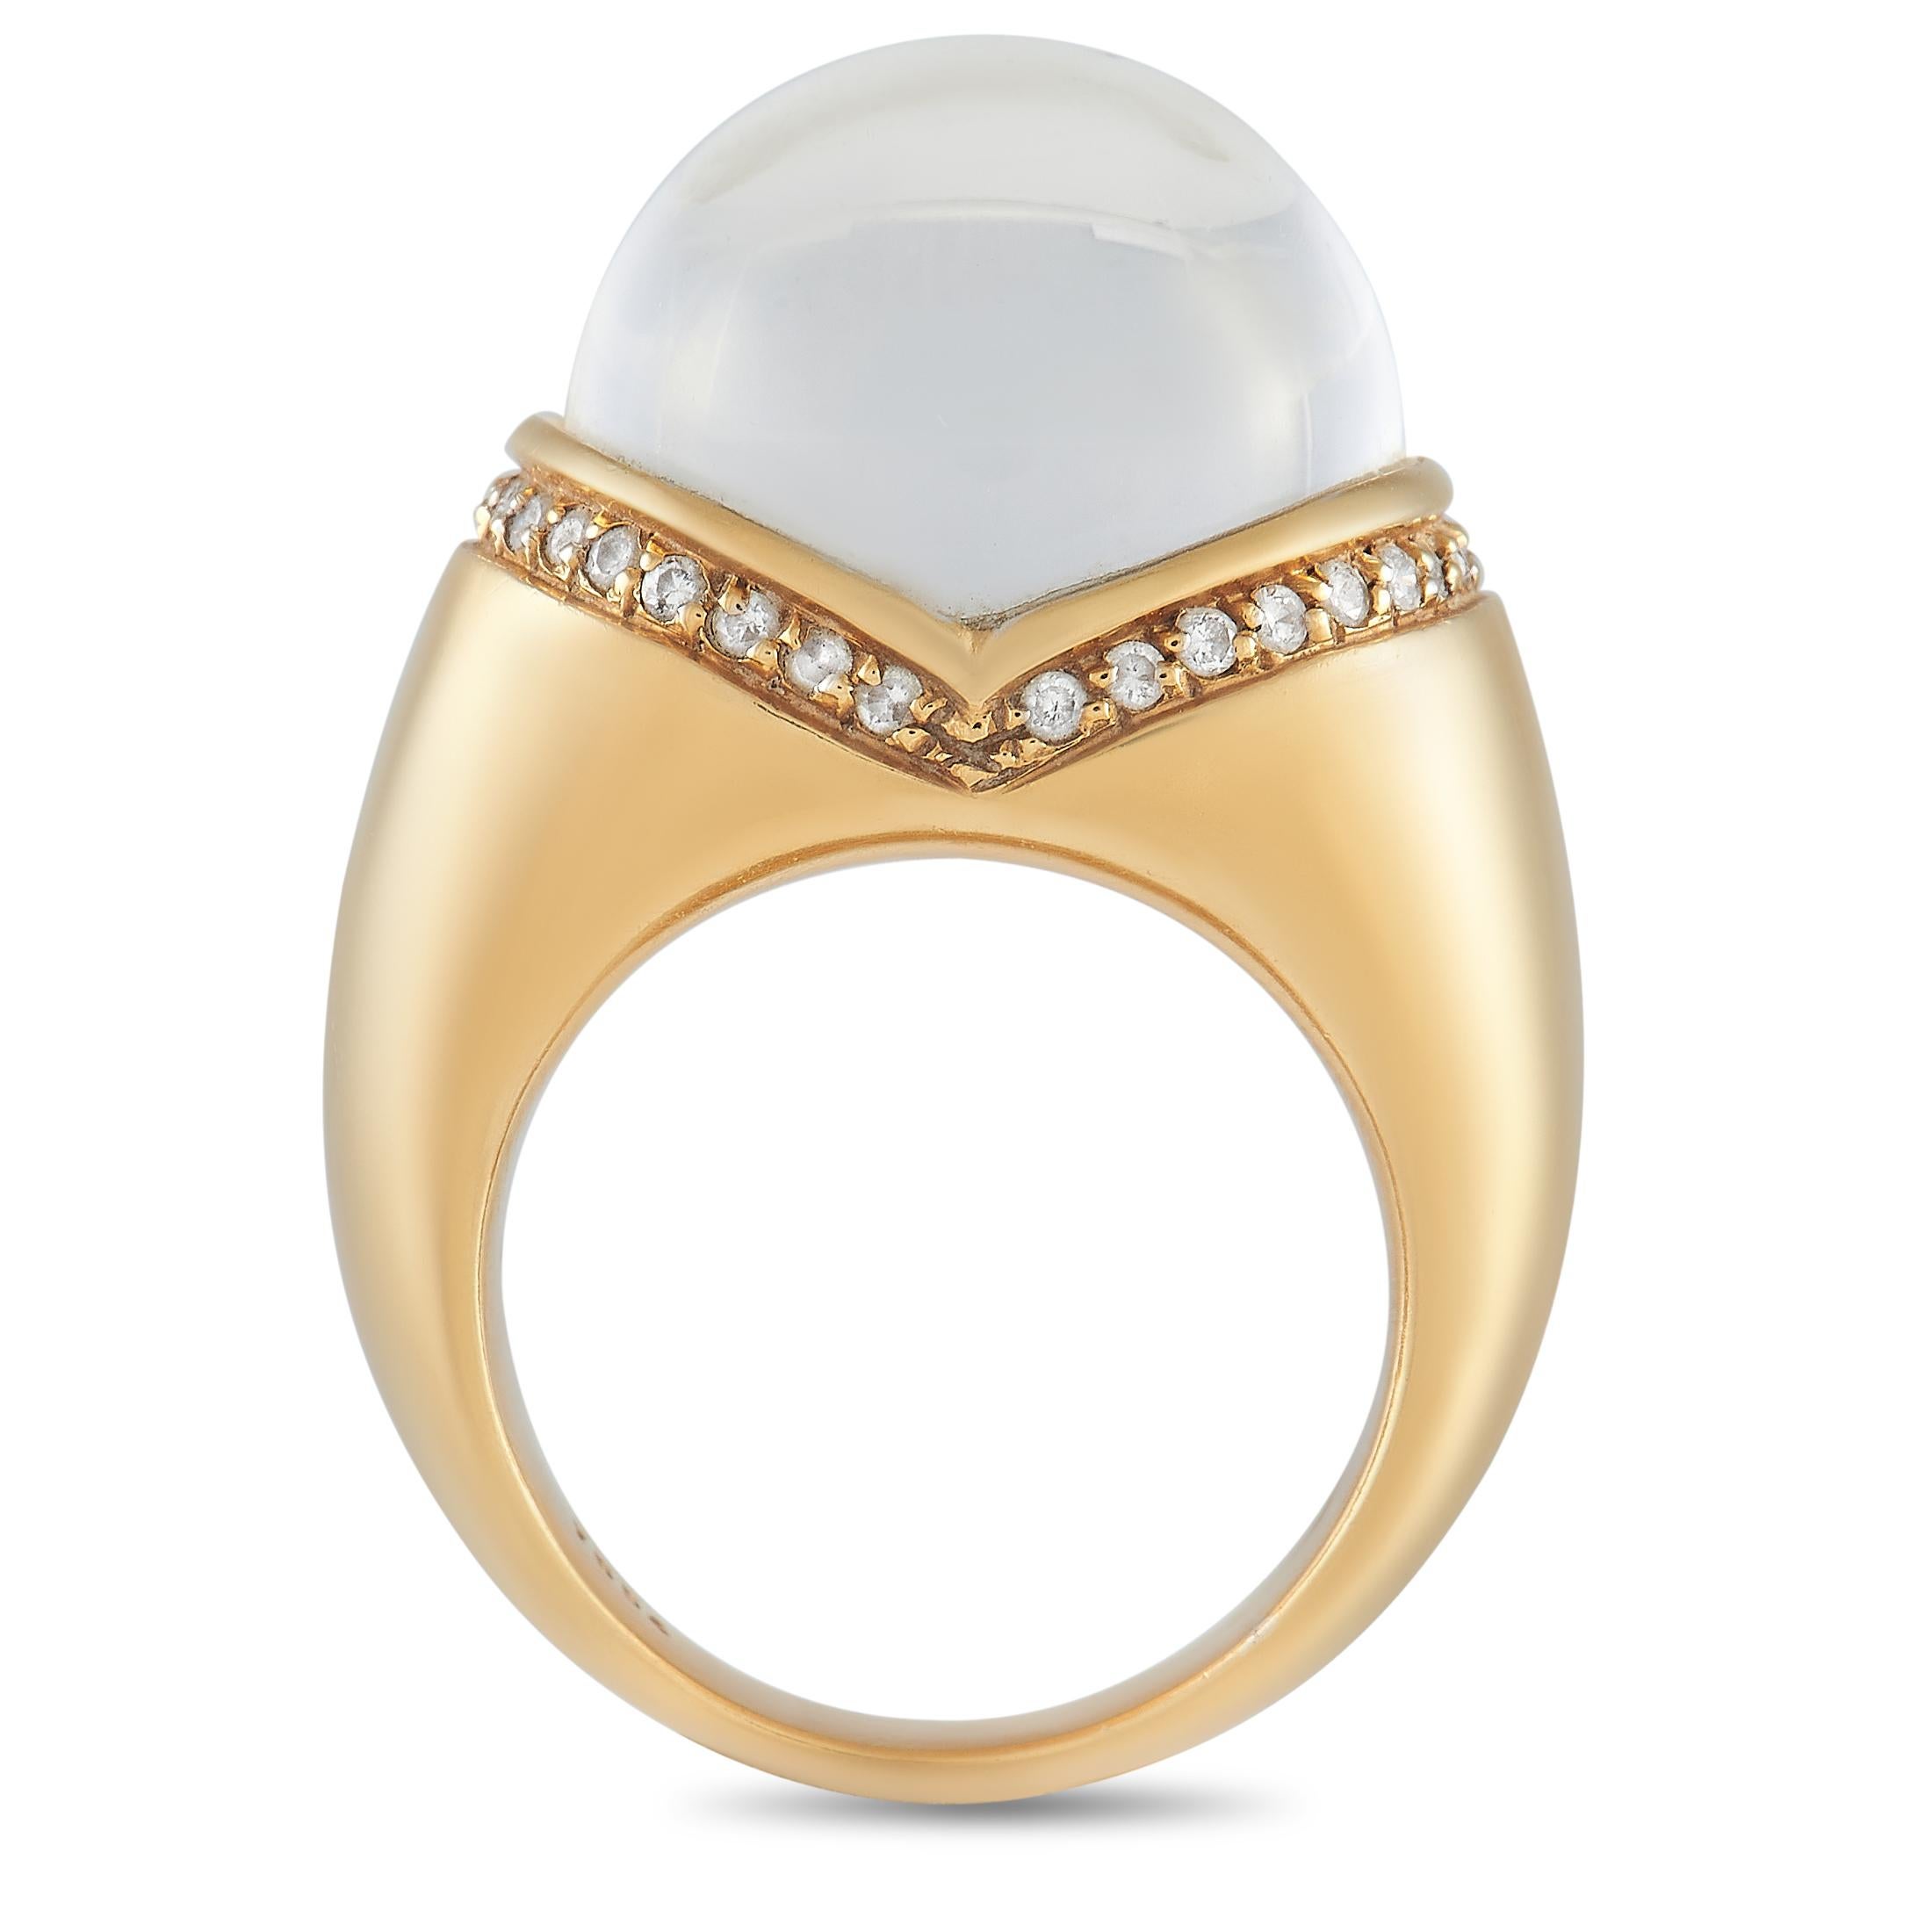 Give your accessorizing game a rocking update with this statement-making piece from Mauboussin. The 7mm thick 18K yellow gold band features a chunky profile with a V-center lined with diamonds and topped with a rock crystal dome. With a 14mm top